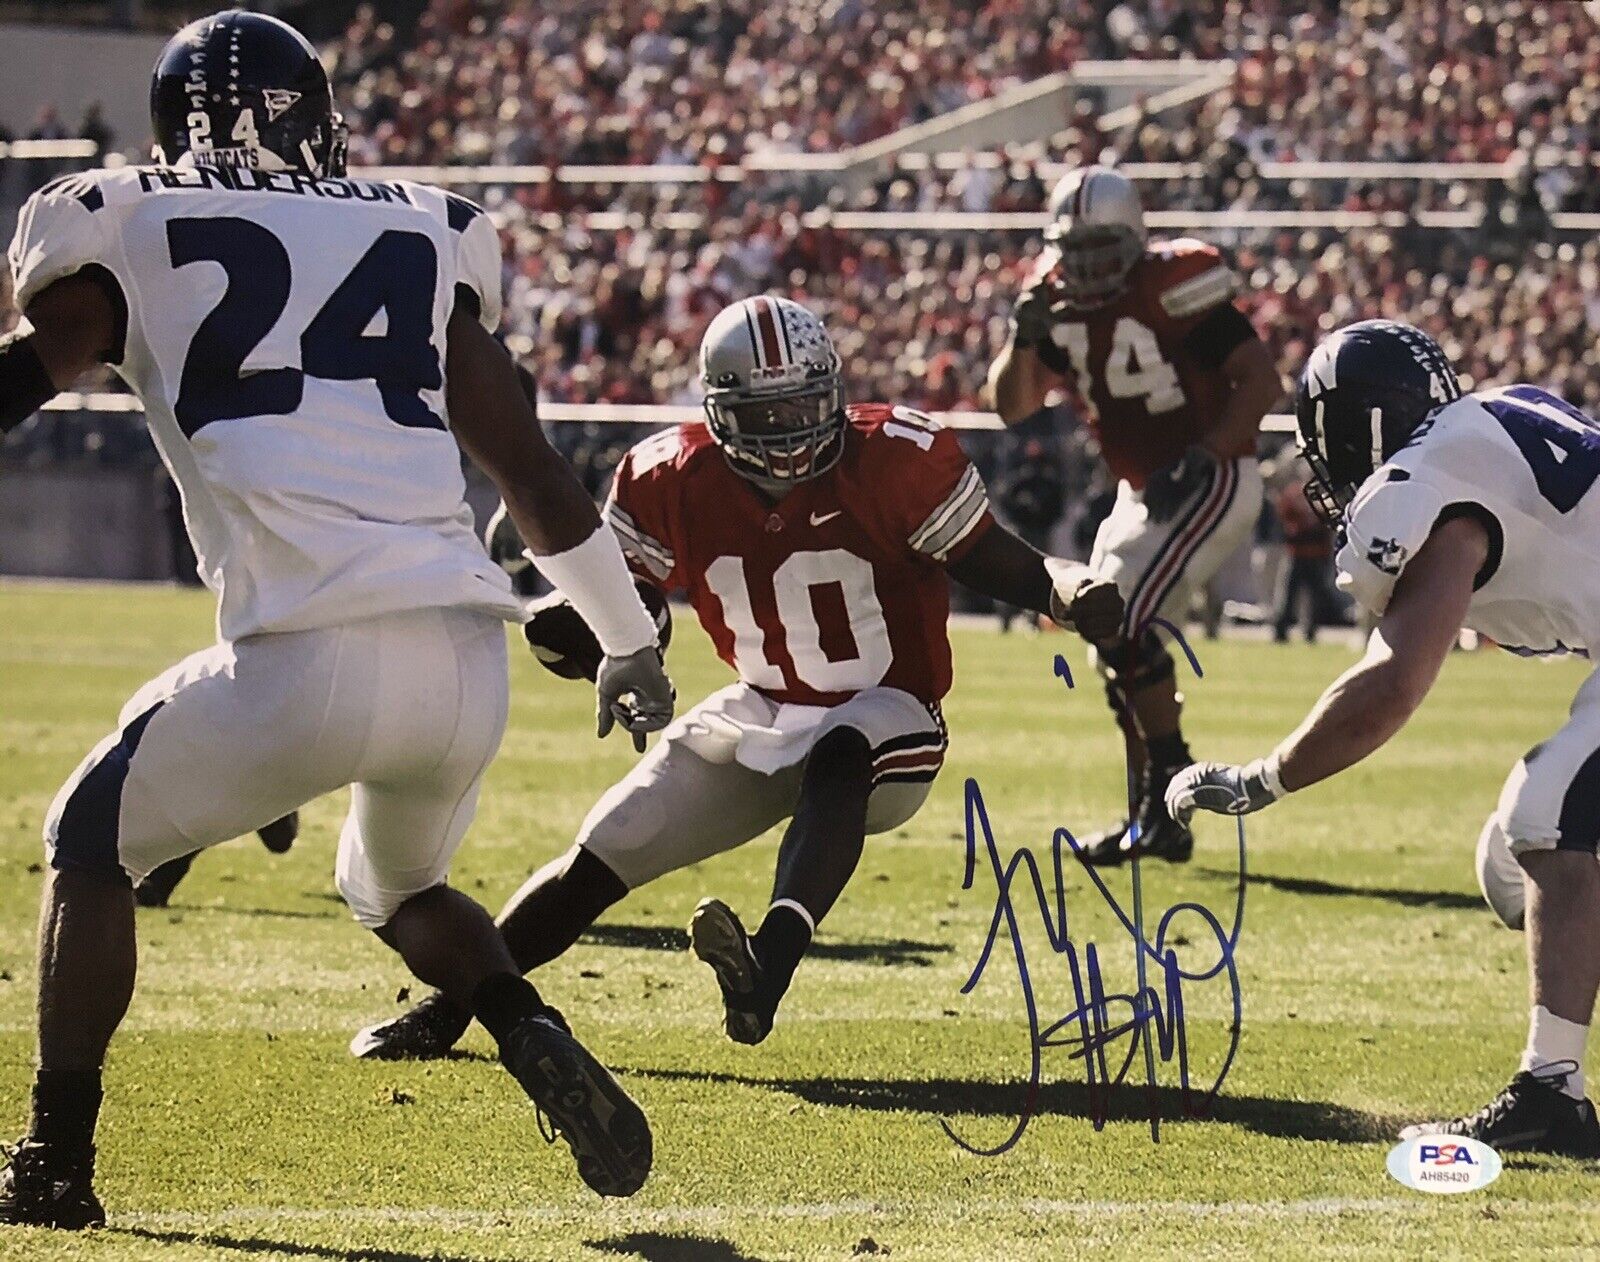 Troy Smith Signed Autographed Ohio State Buckeyes 11x14 Photo Poster painting Heisman Psa/Dna